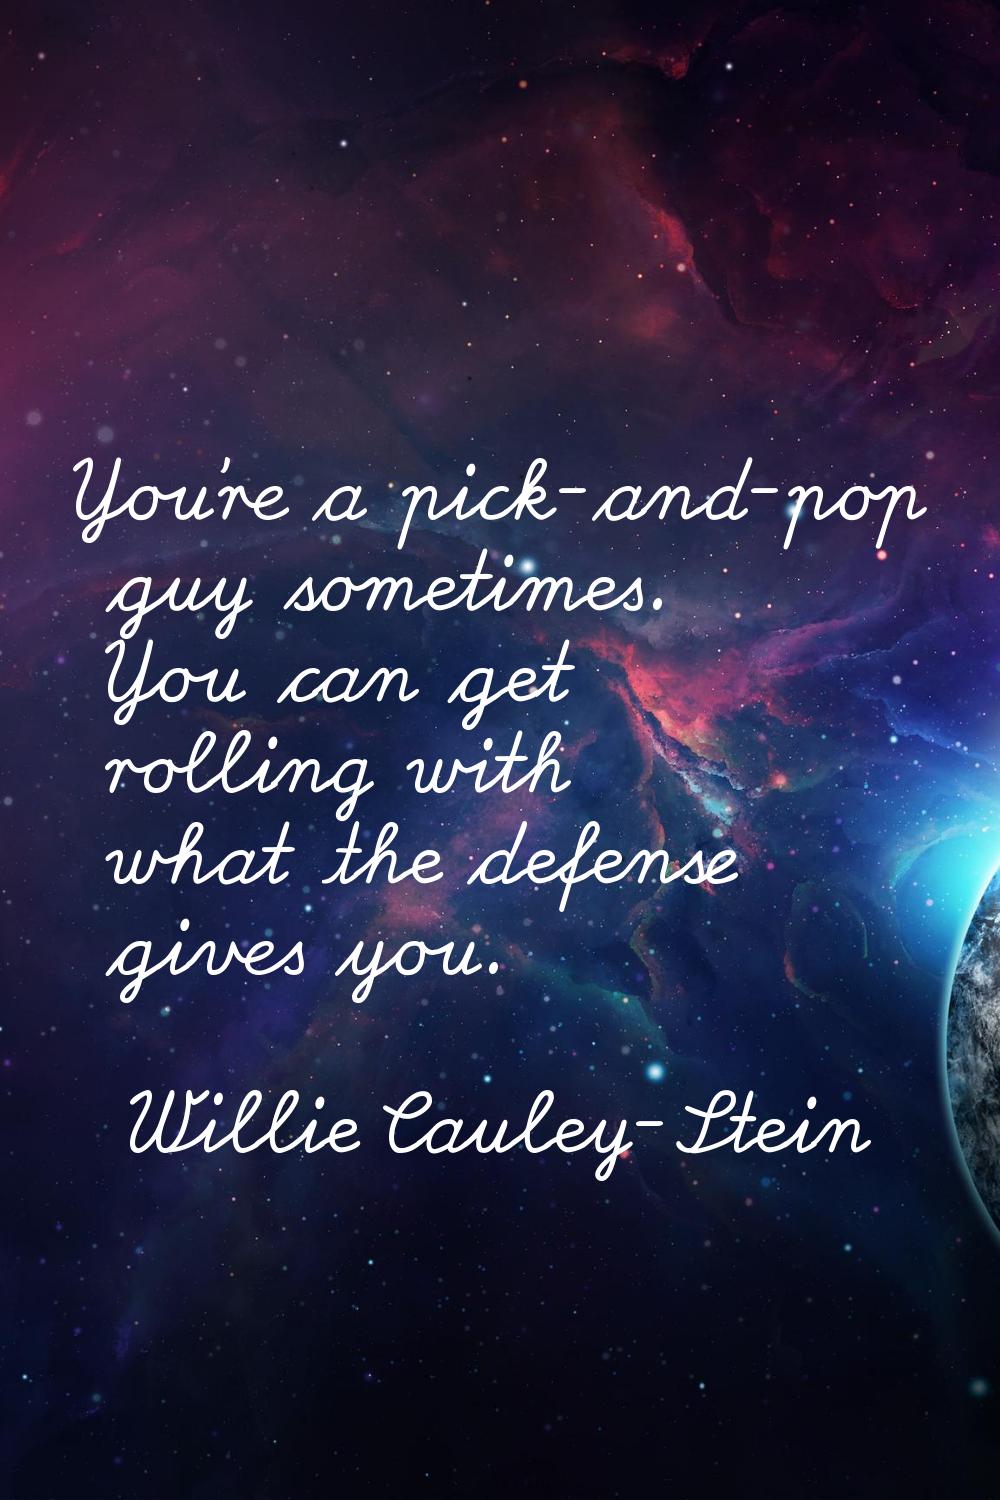 You're a pick-and-pop guy sometimes. You can get rolling with what the defense gives you.